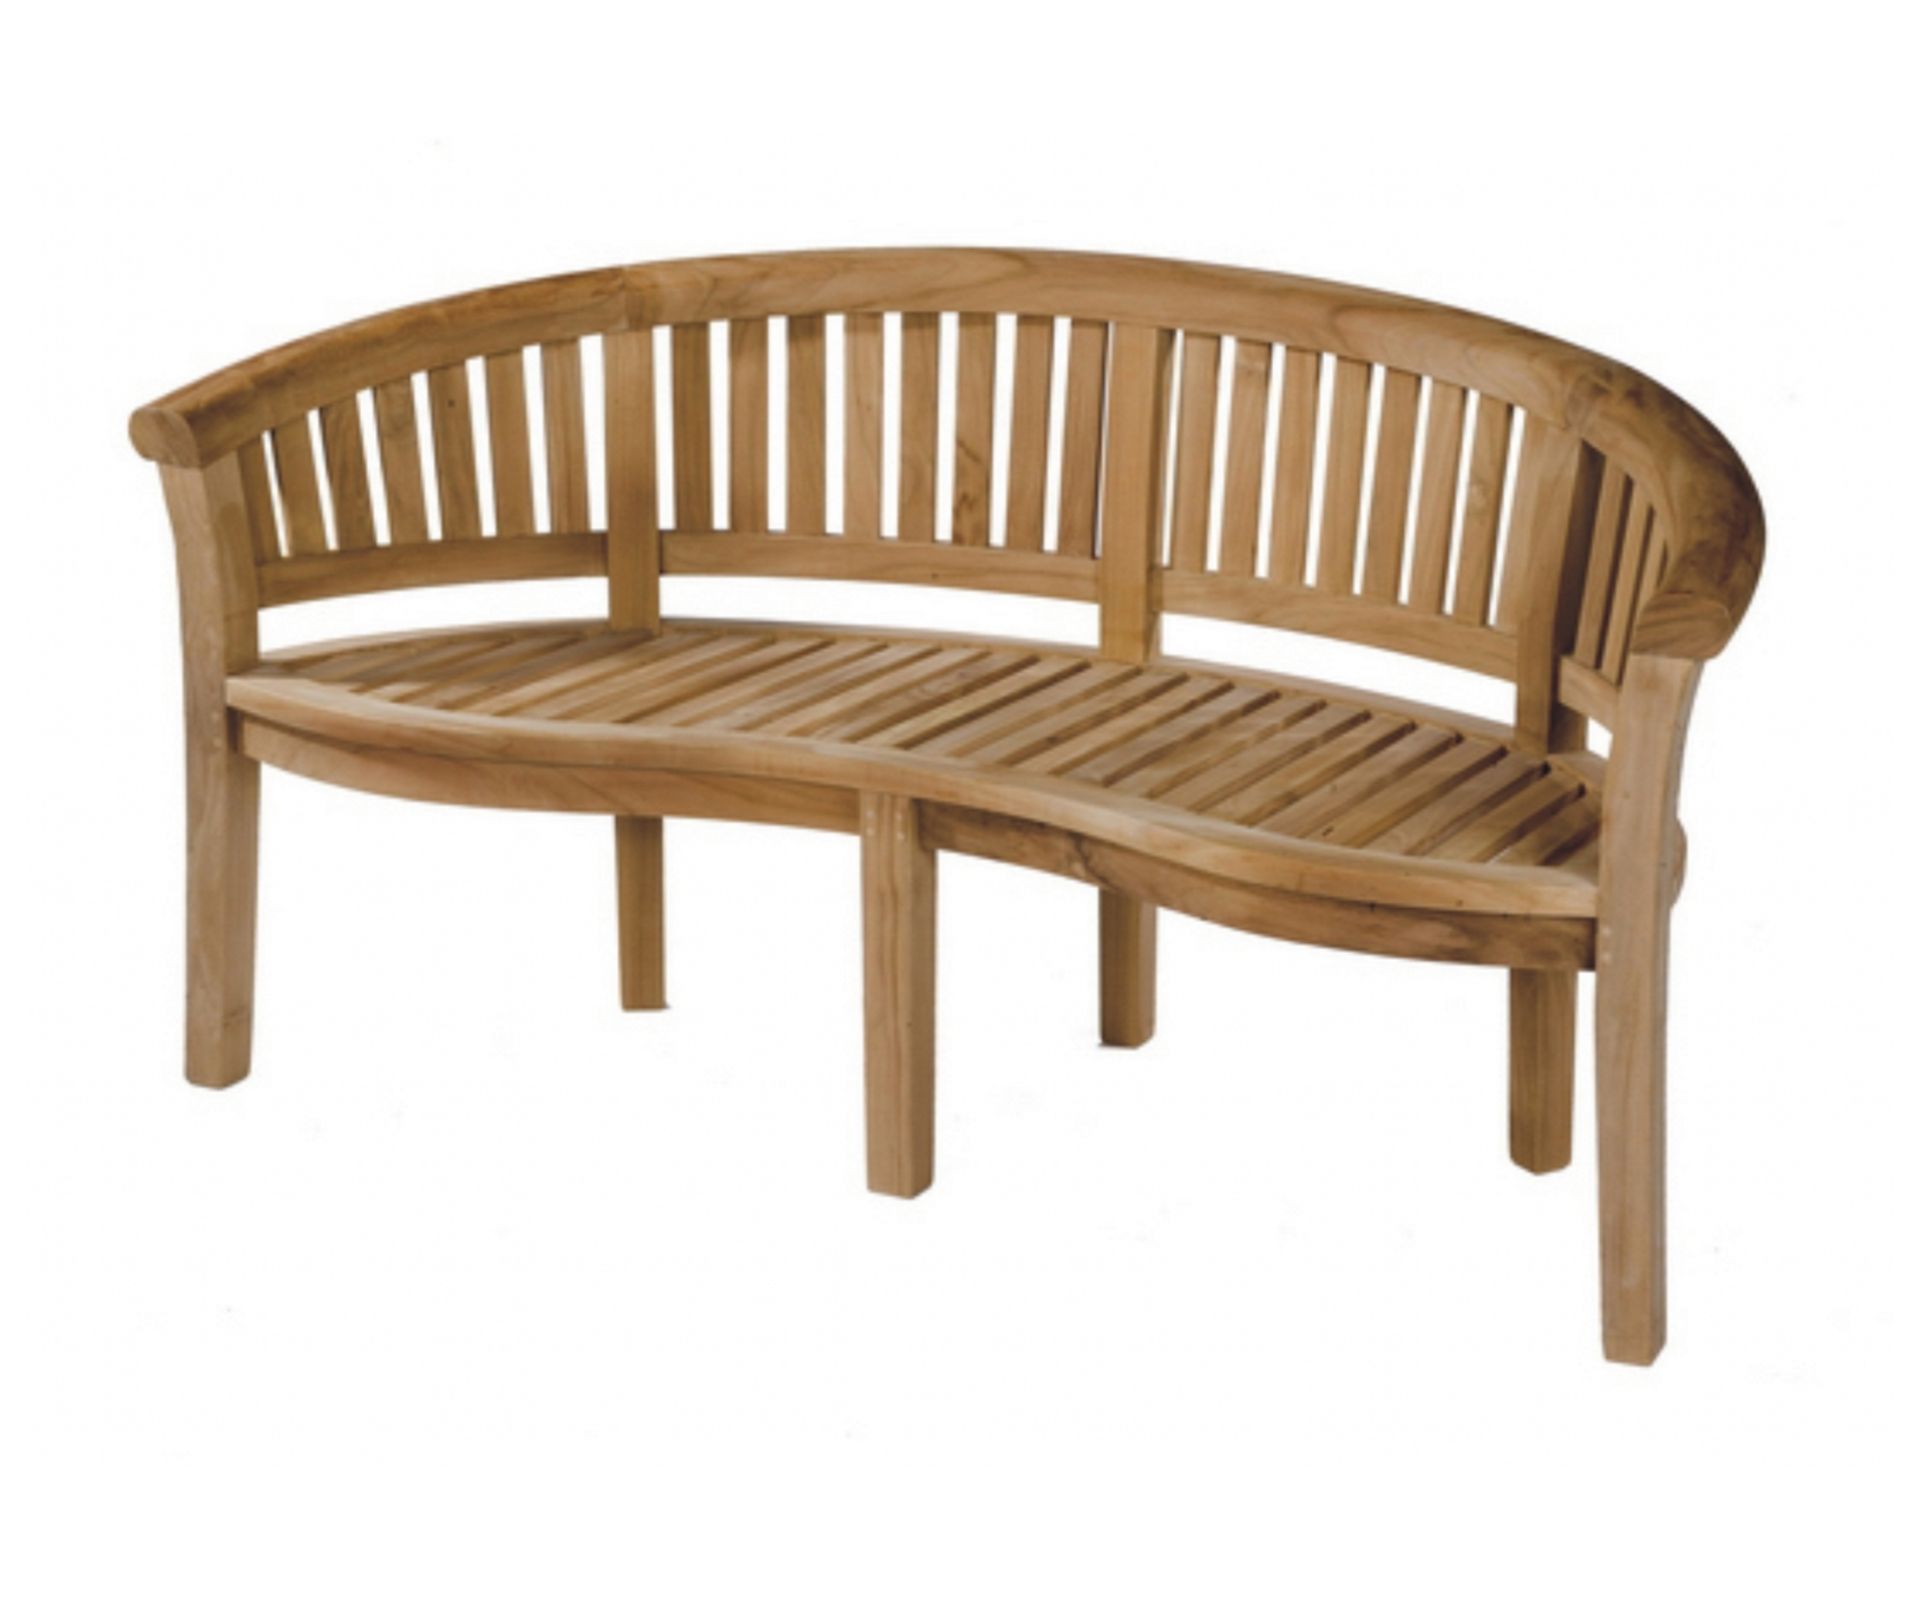 BRAND NEW BOXED SOLID TEAK PEANUT BENCH